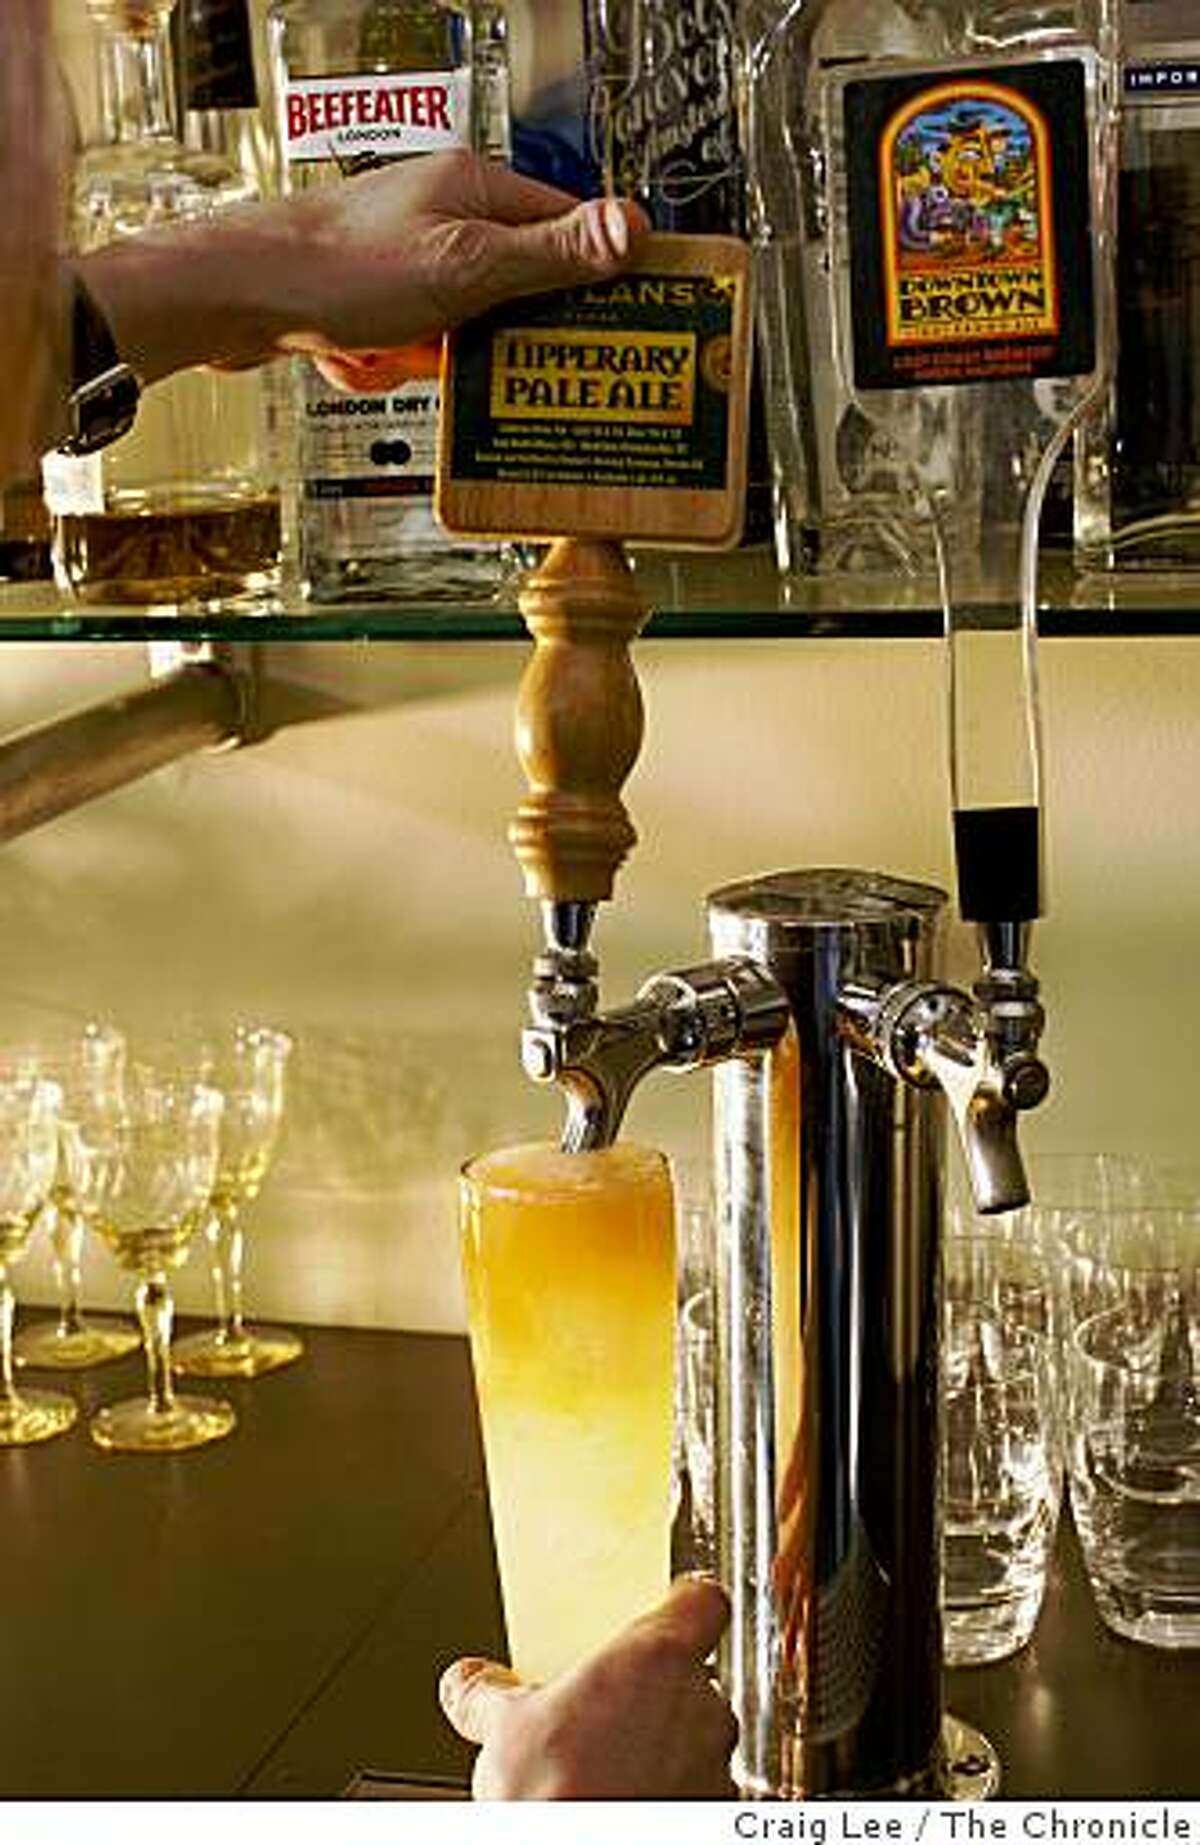 Brooke Arthur, making a cocktail drink, called Strange Brew, where beer is one of the ingredients at Range restaurant in San Francisco, Calif., on January 7, 2009. The recipe suggests Racer 5 IPA but Range also uses Moylans Tippeary Pale Ale.